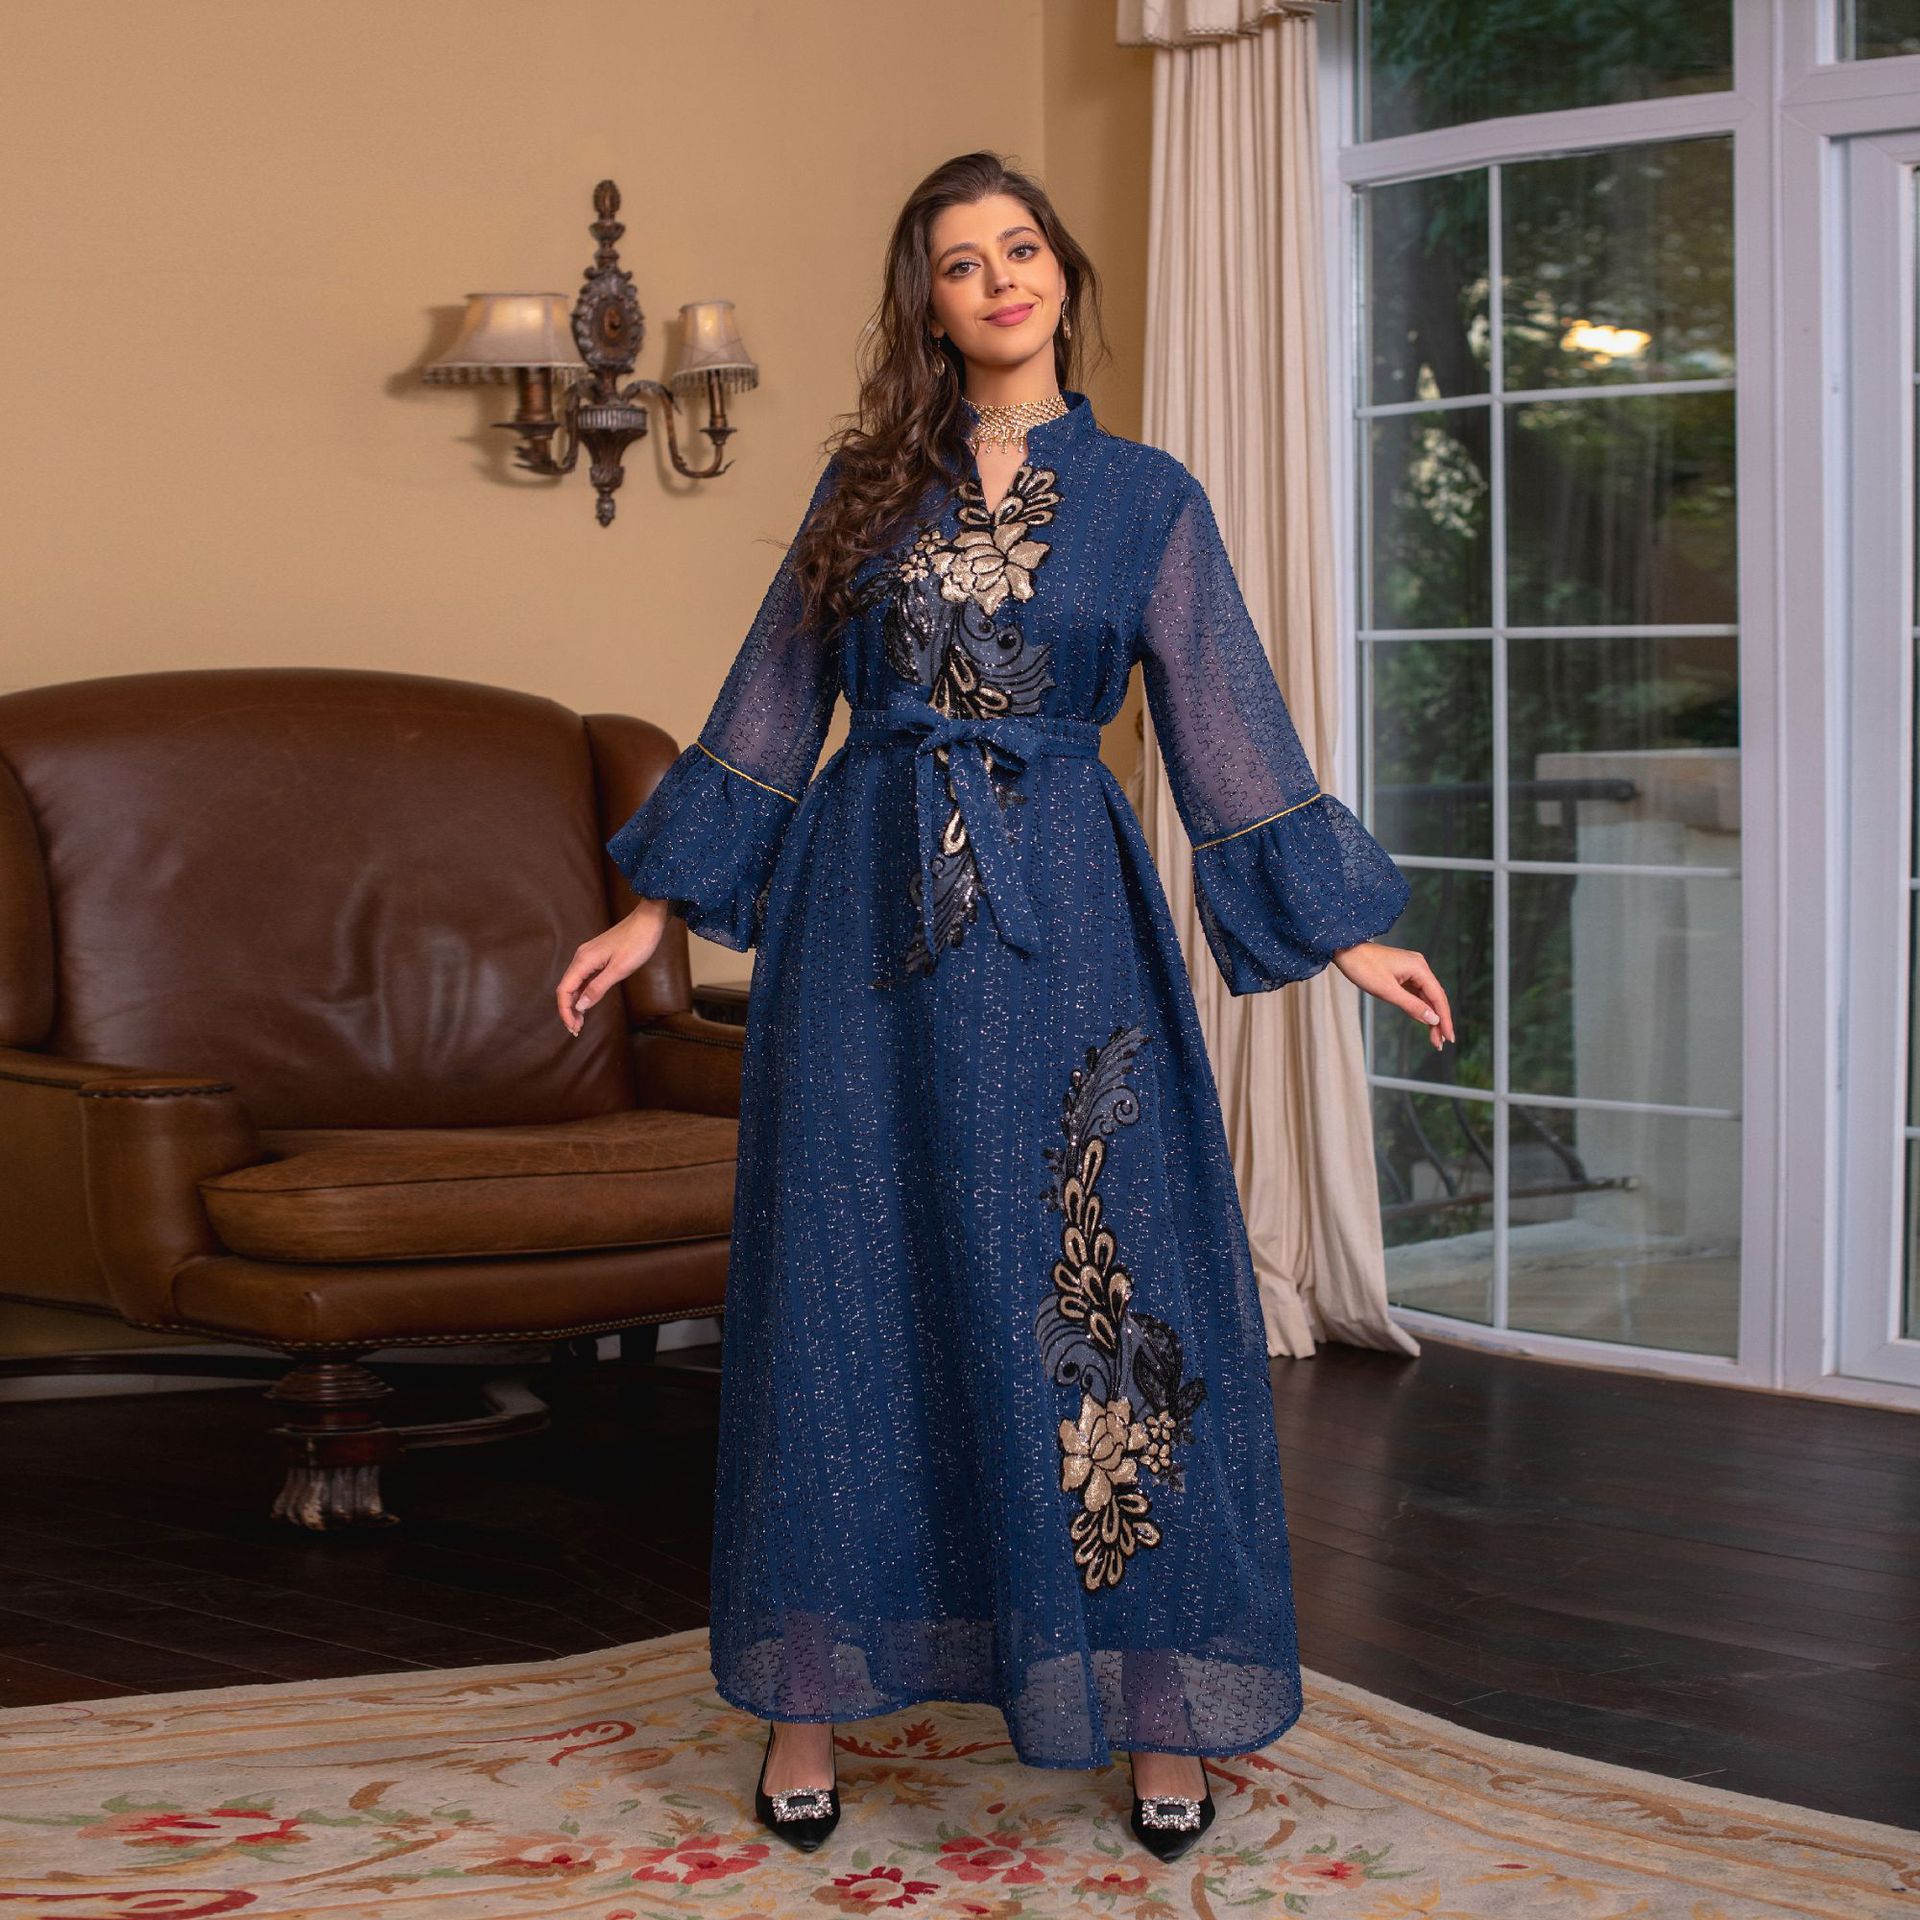 Jalabiya Elevate your style with a fashionable and avant-garde jalabiya | featuring embroidered appliques | bell sleeves | a waist-cinching tie | and a contemporary edge